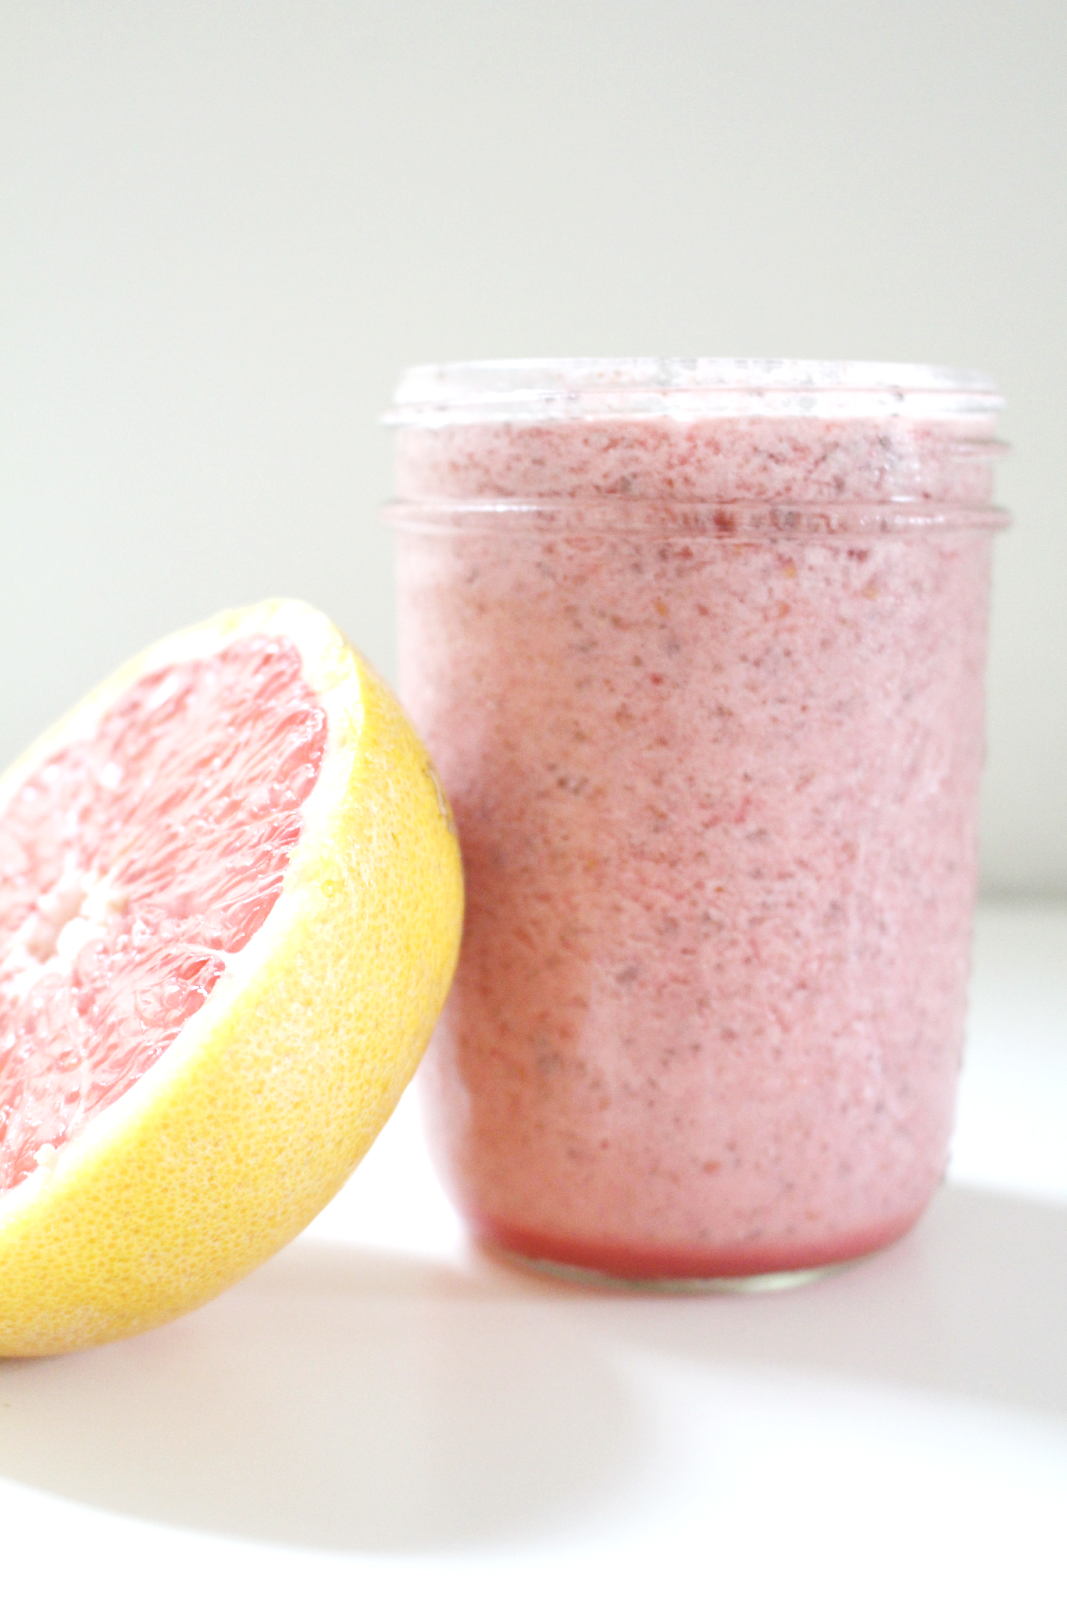 How To: Sunrise Chia Seed Smoothie Recipe